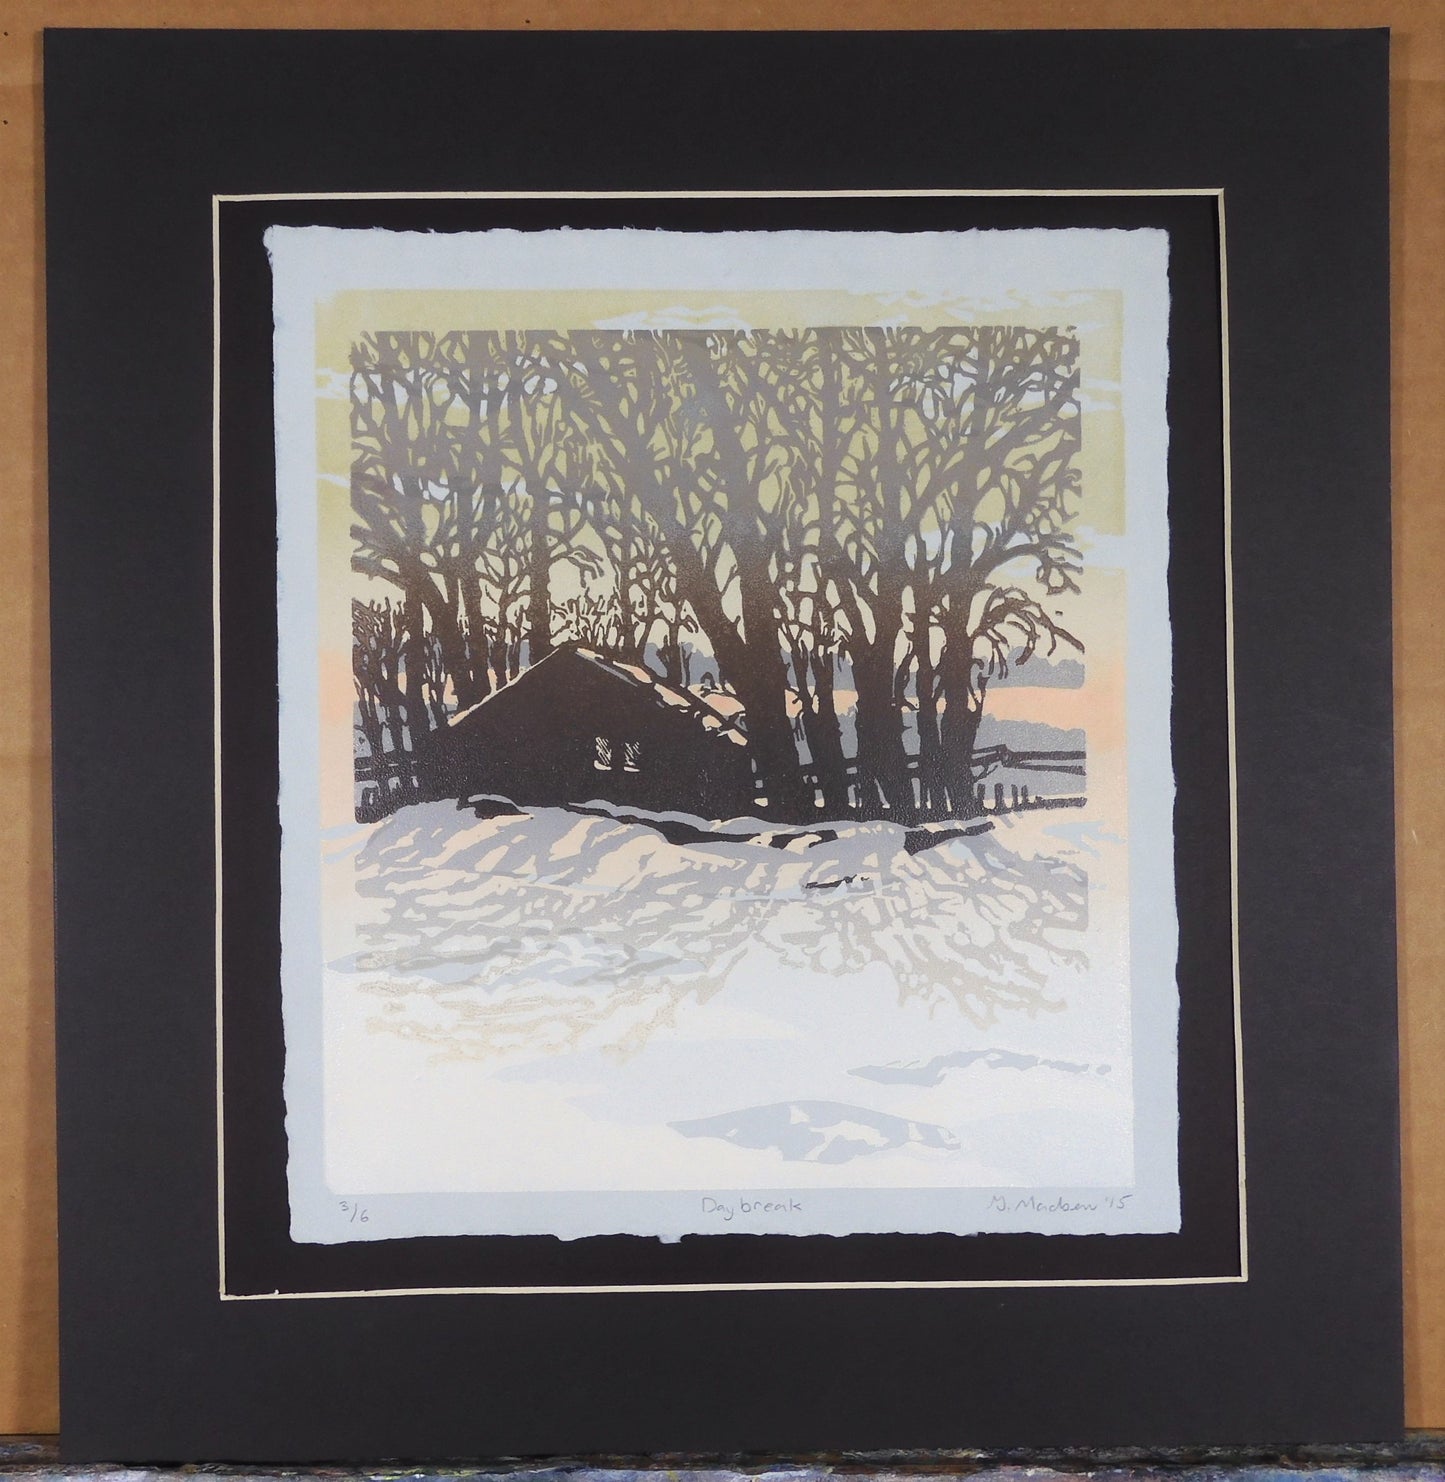 " Day Break " Matted Original Relief Print Artist: Ginnie Madsen  Cabin in the snow during day break  Printed on handmade paper  1 3/4" dark brown matting around the relief print  9" long x 11" high print on paper  14" long  x 15" high x 1/16" as matted  Ready for a frame  Original Relief print  Print # 3 o